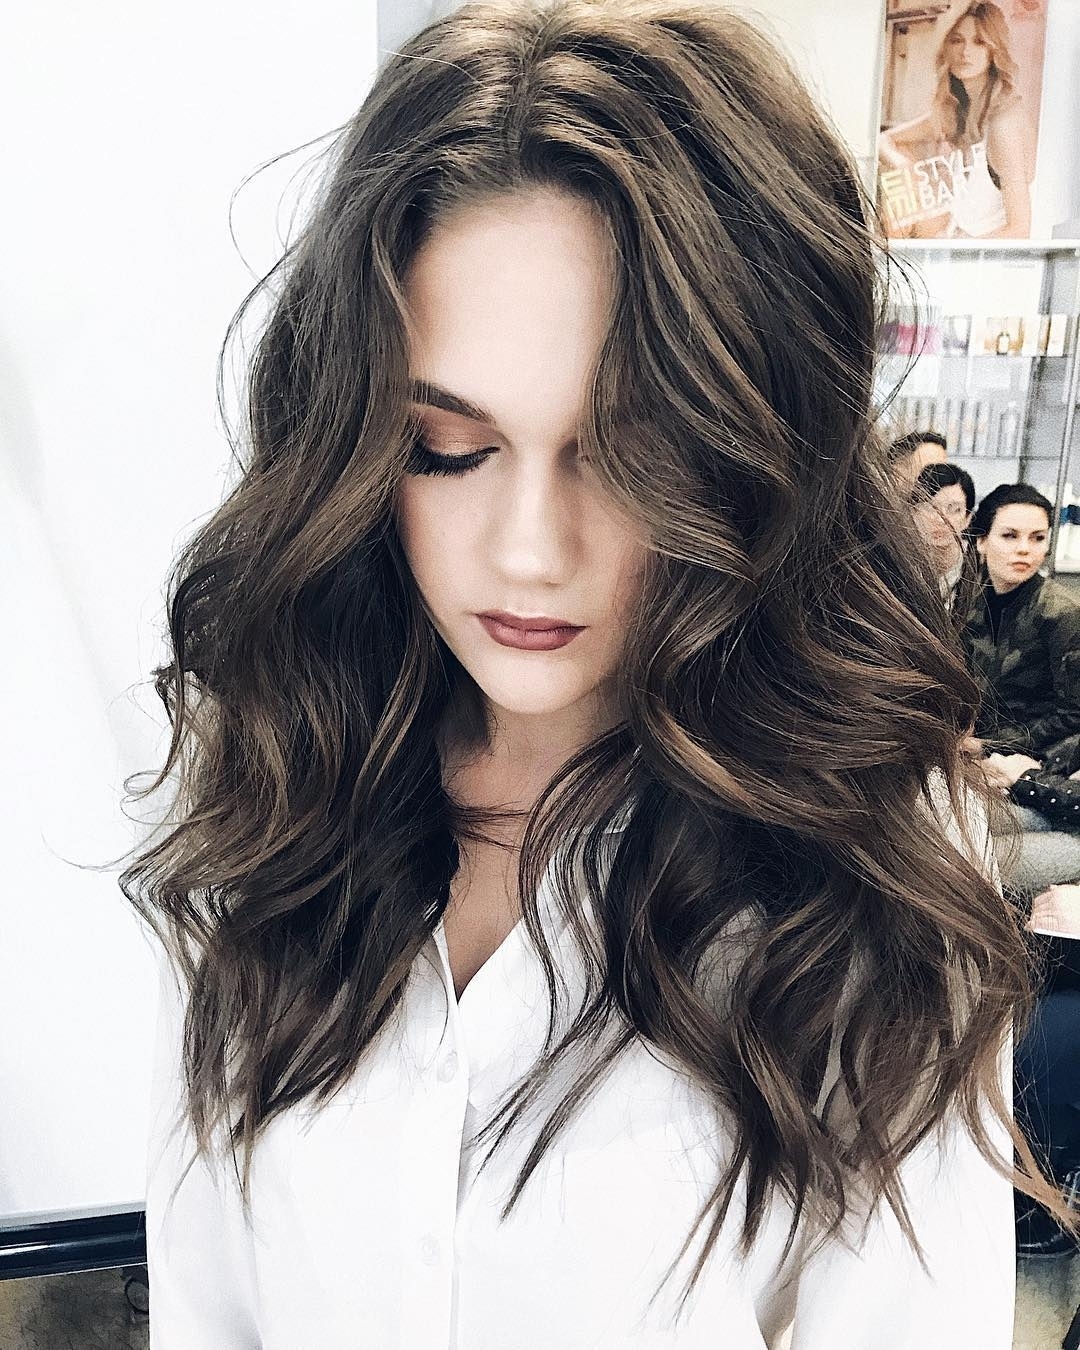 10 Gorgeous Long Wavy Perm Hairstyles, Long Hair Styles 2019 throughout Permed Hairstyles For Longer Hair